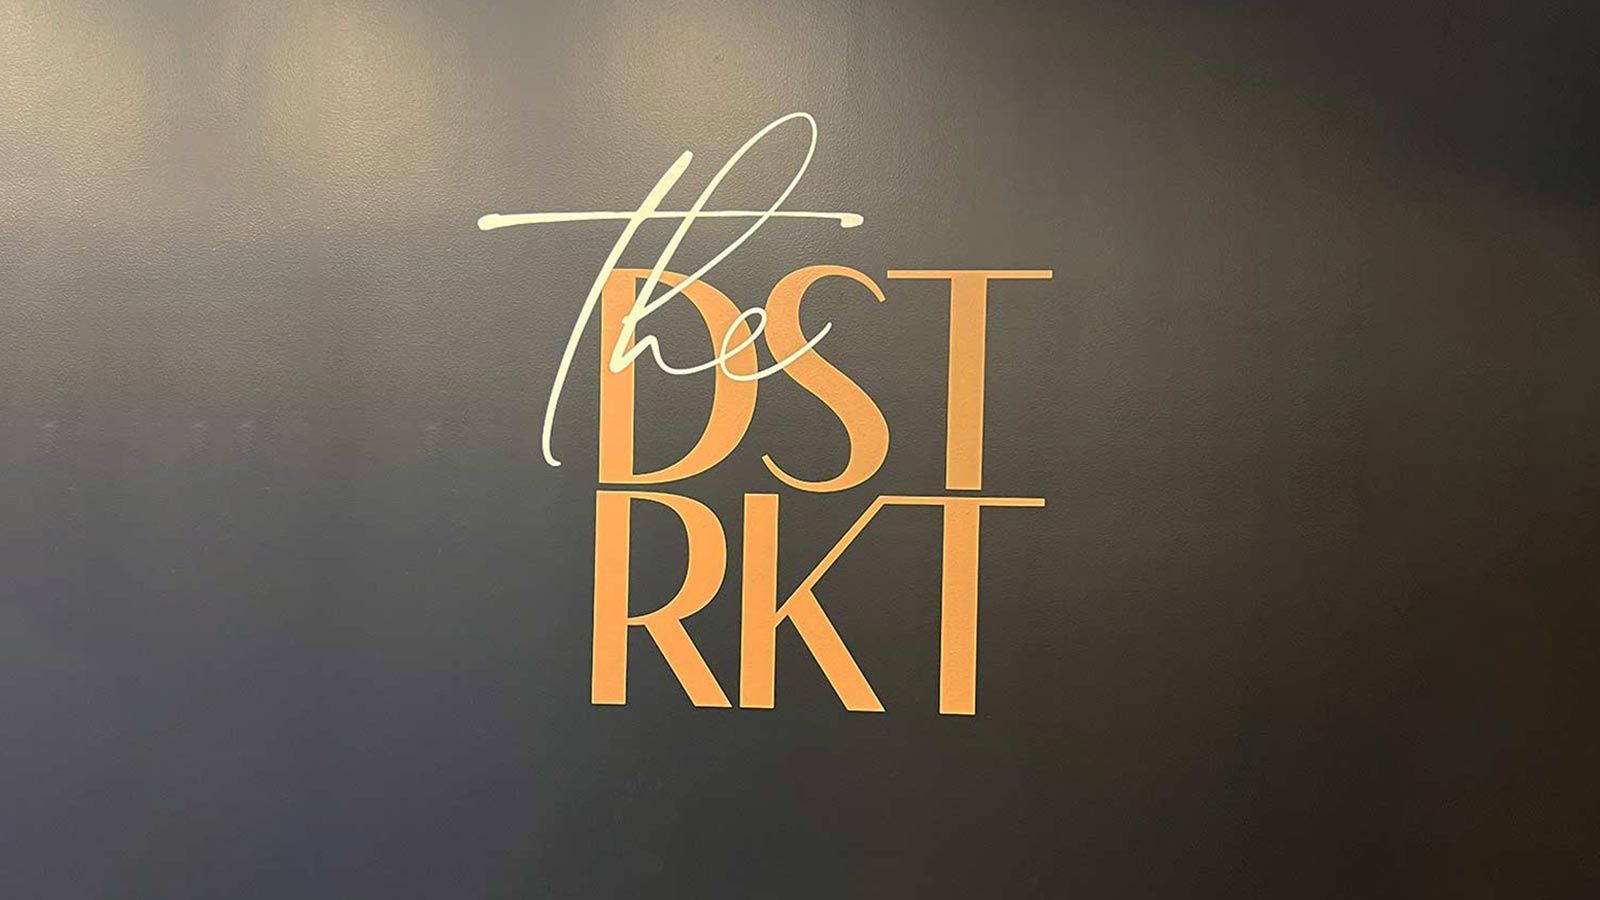 The DSTRKT wall decal applied indoors